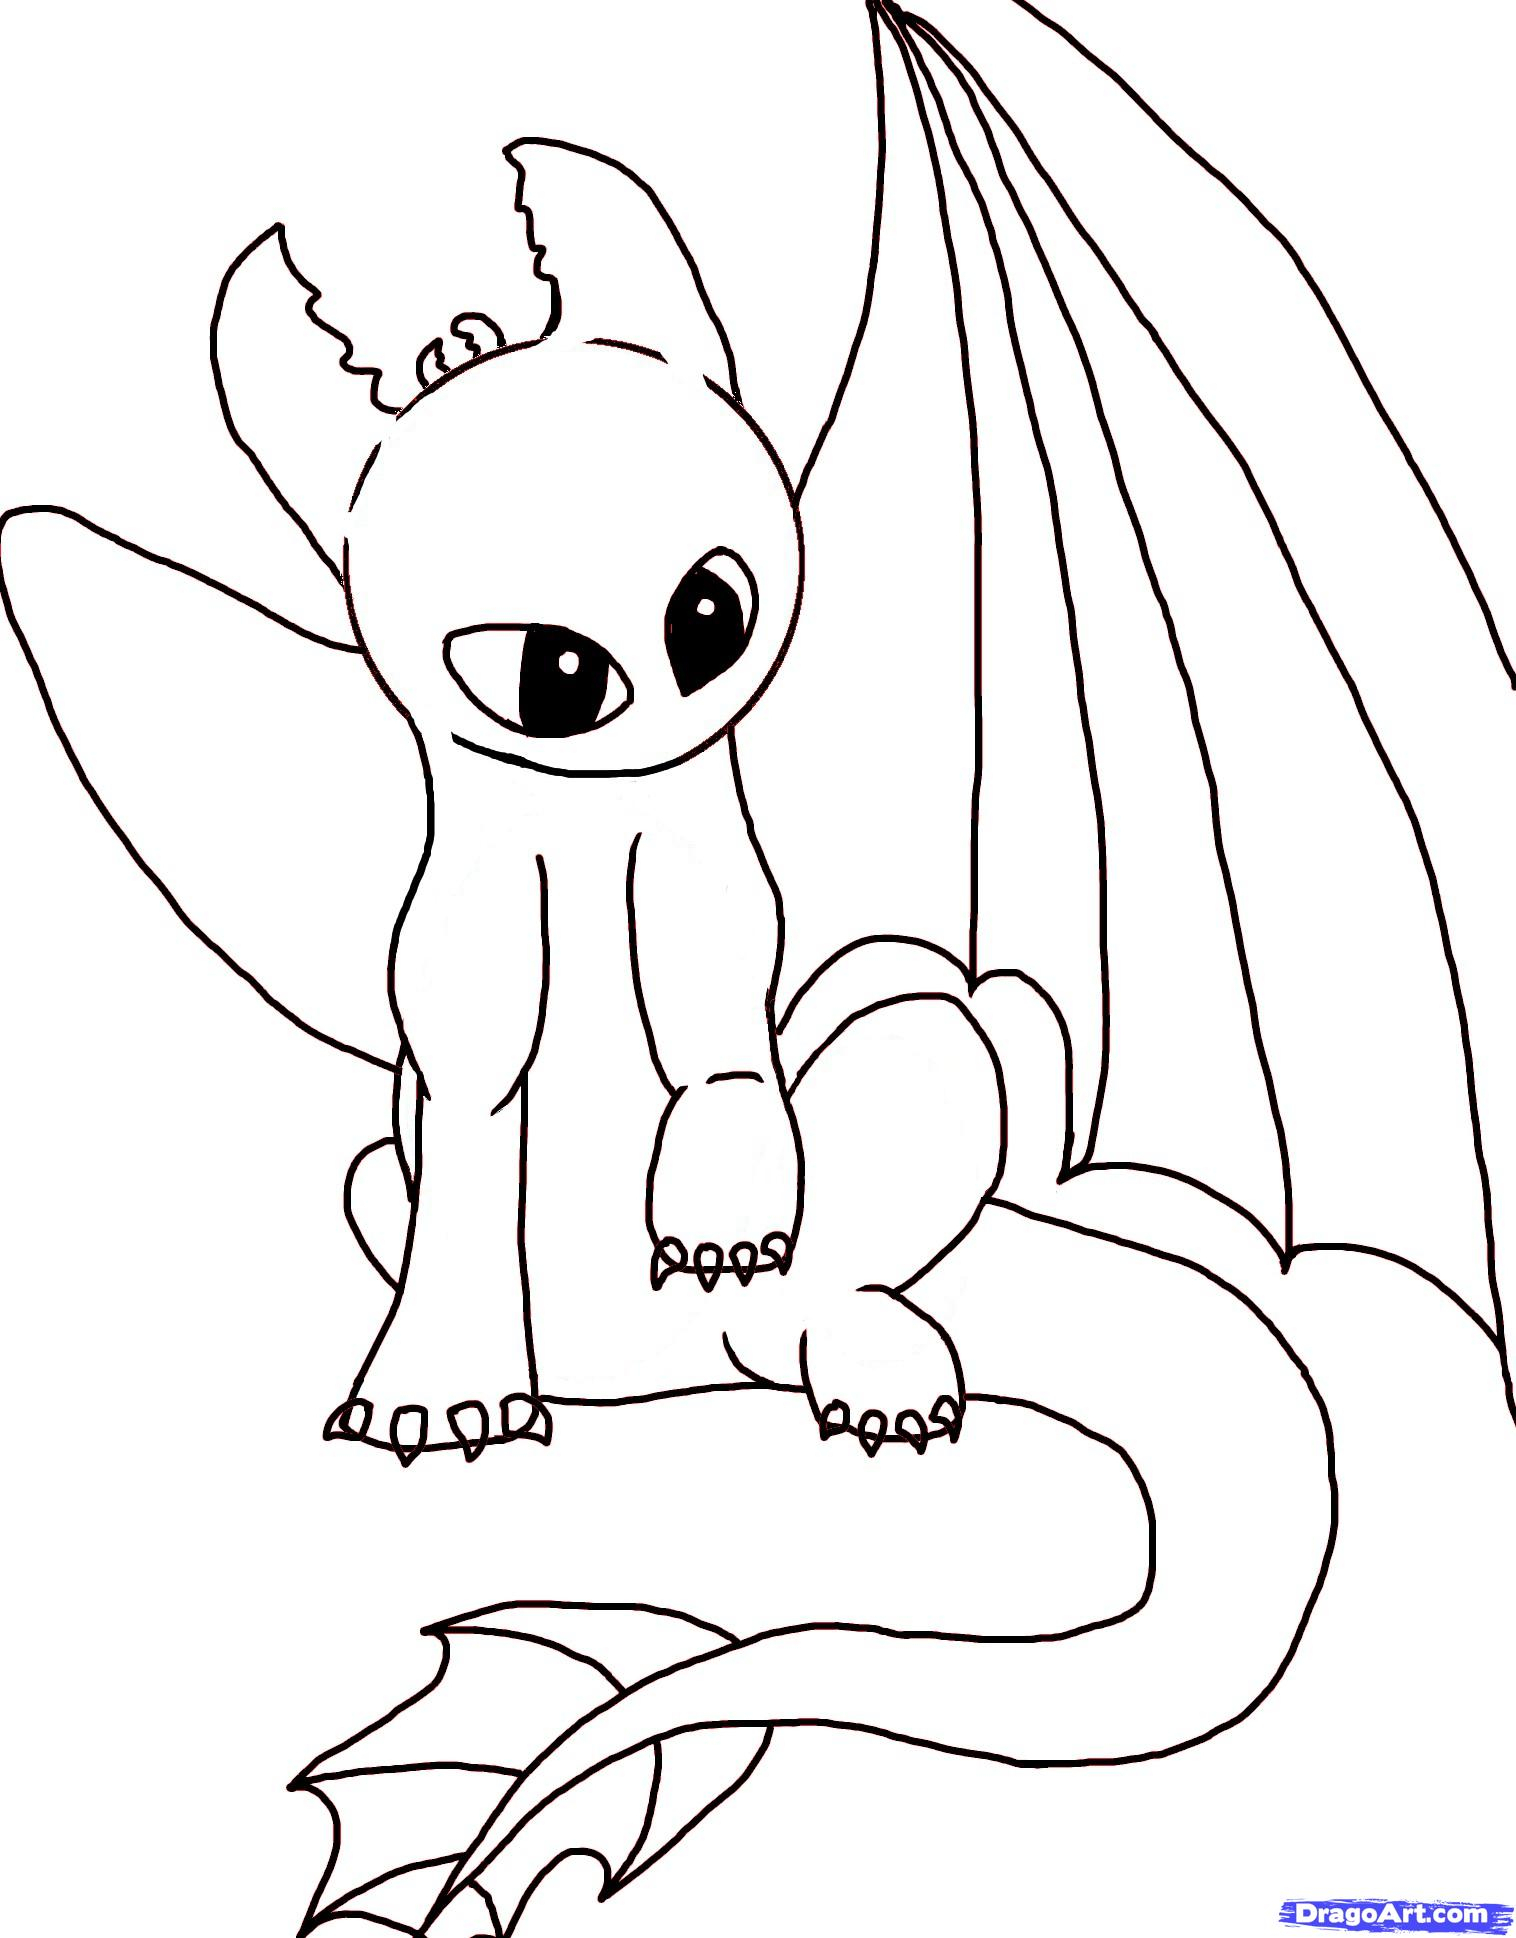 1516x1938 Drawings Of Baby Dragons How To Draw Baby Night Fury, Baby.